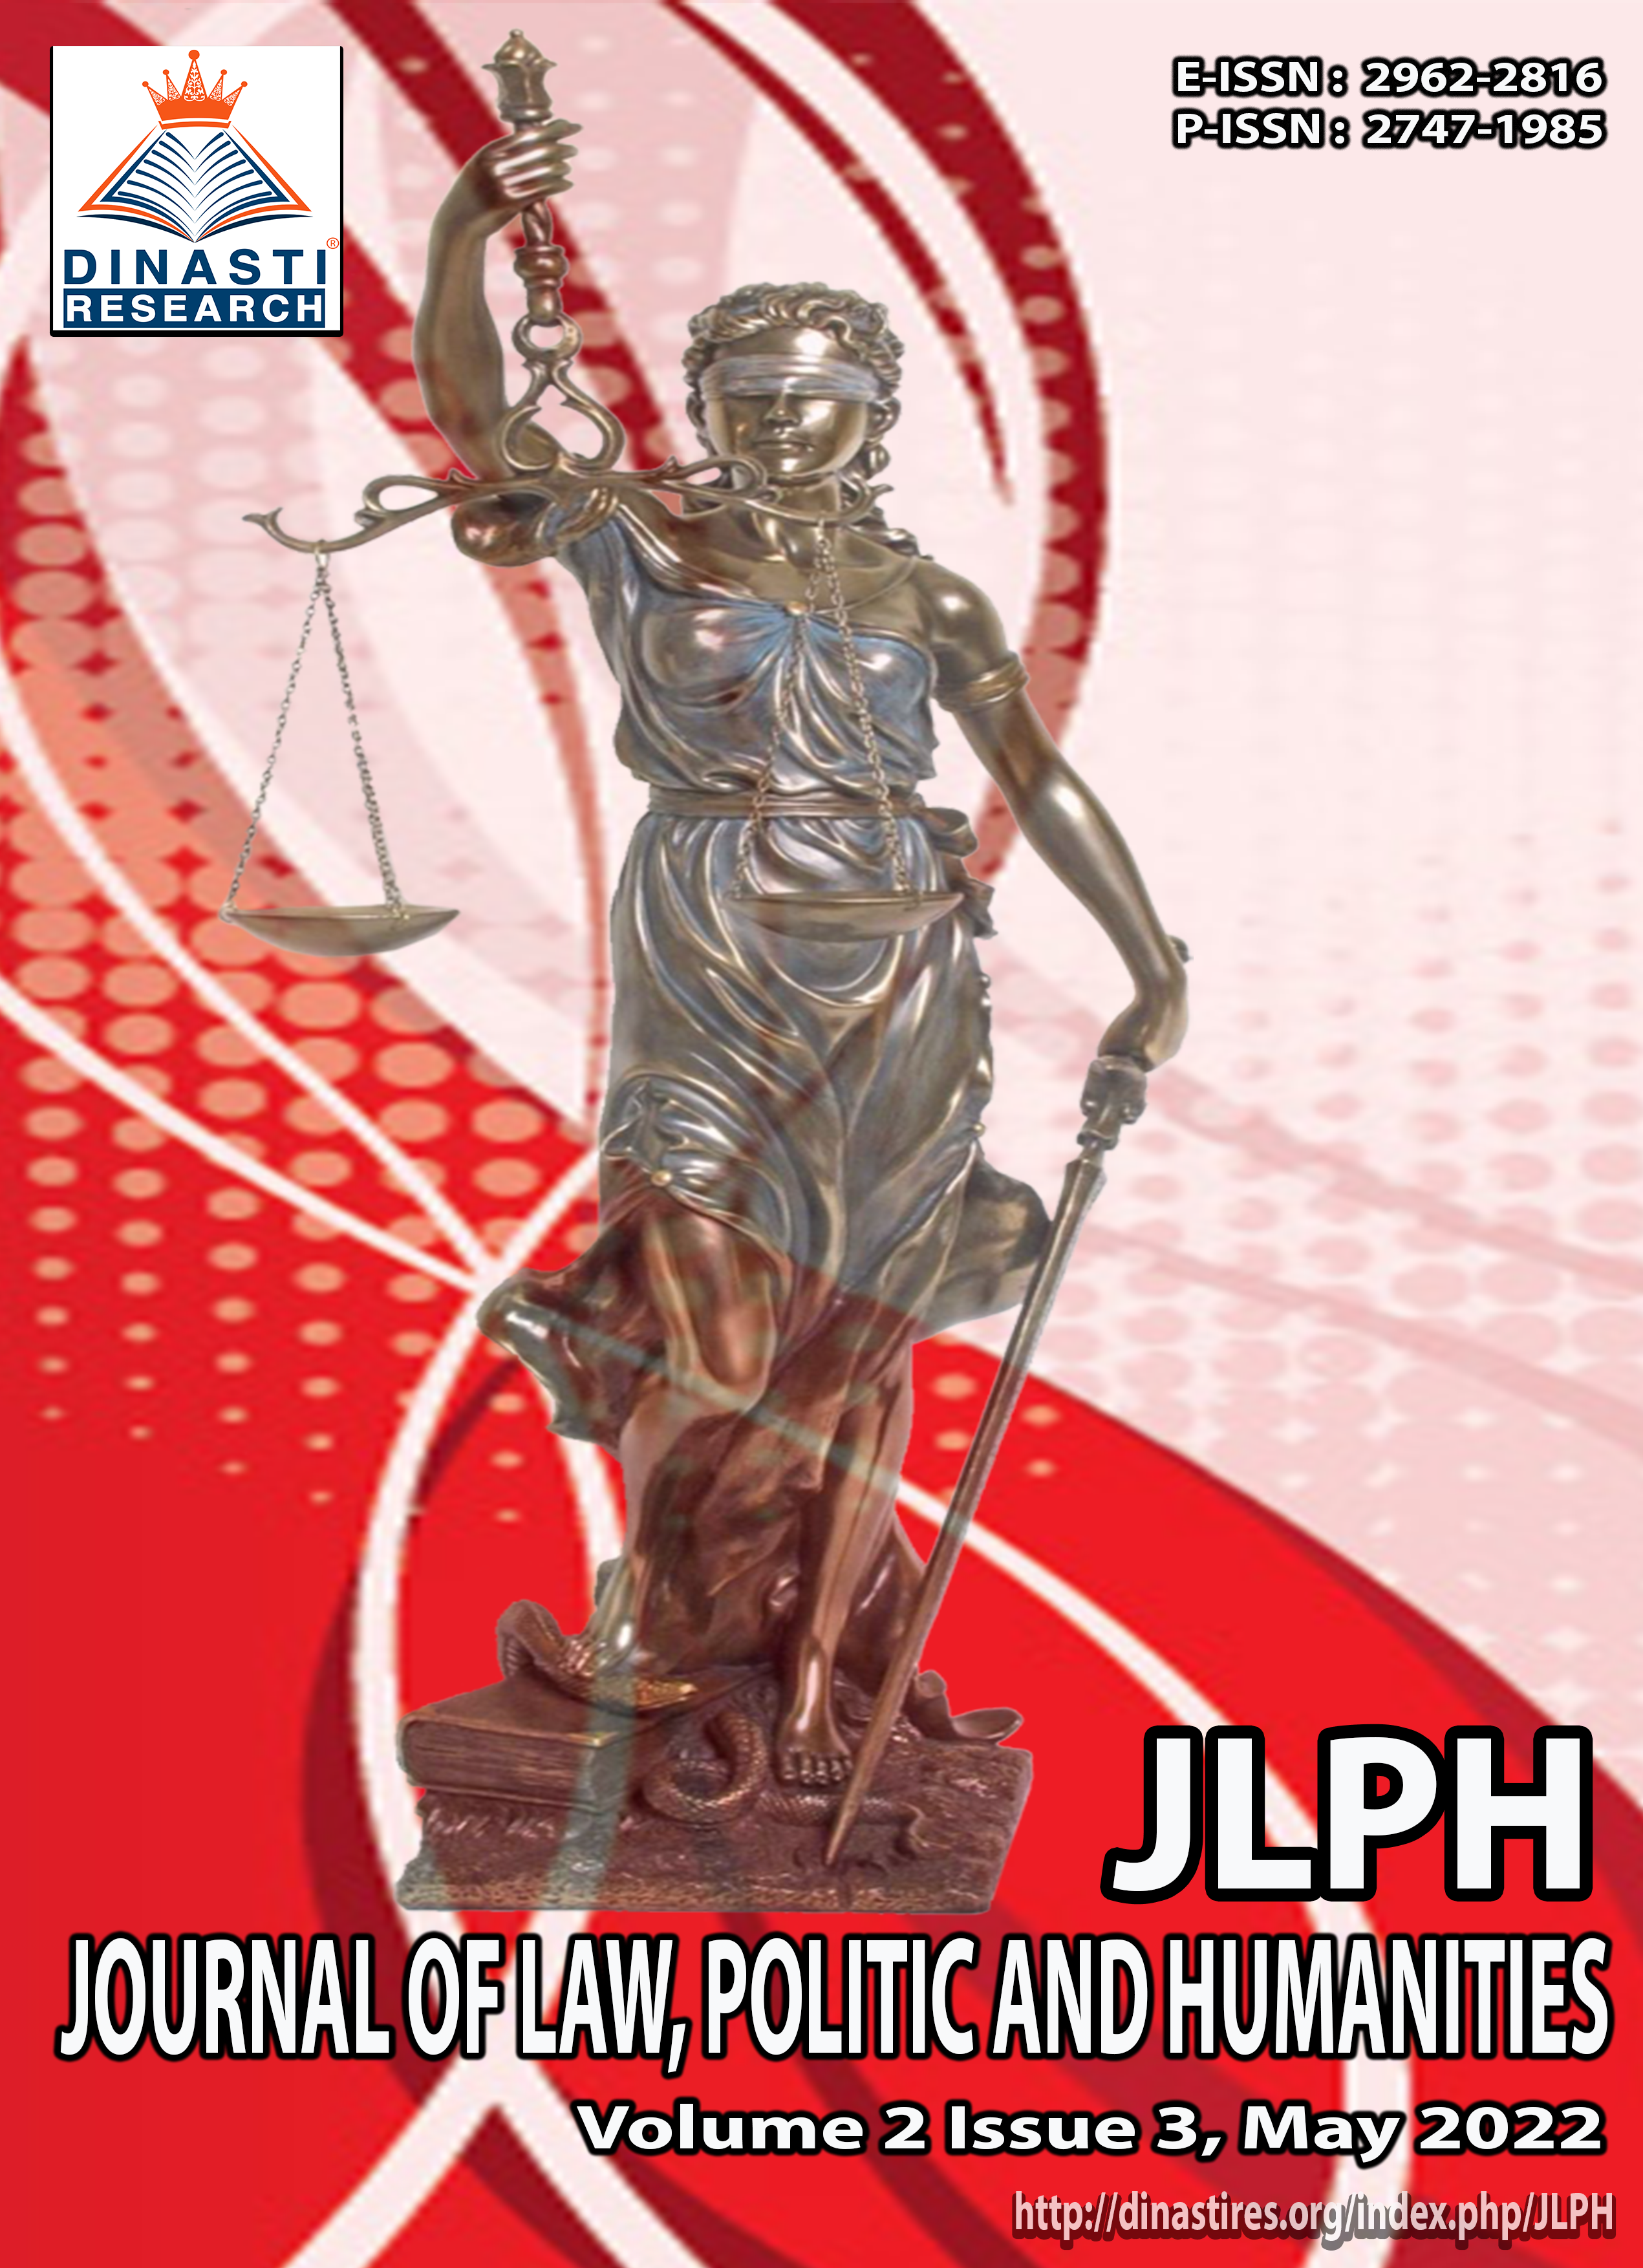 					View Vol. 2 No. 3 (2022): (JLPH) Journal of Law, Politic and Humanities (May 2022)
				